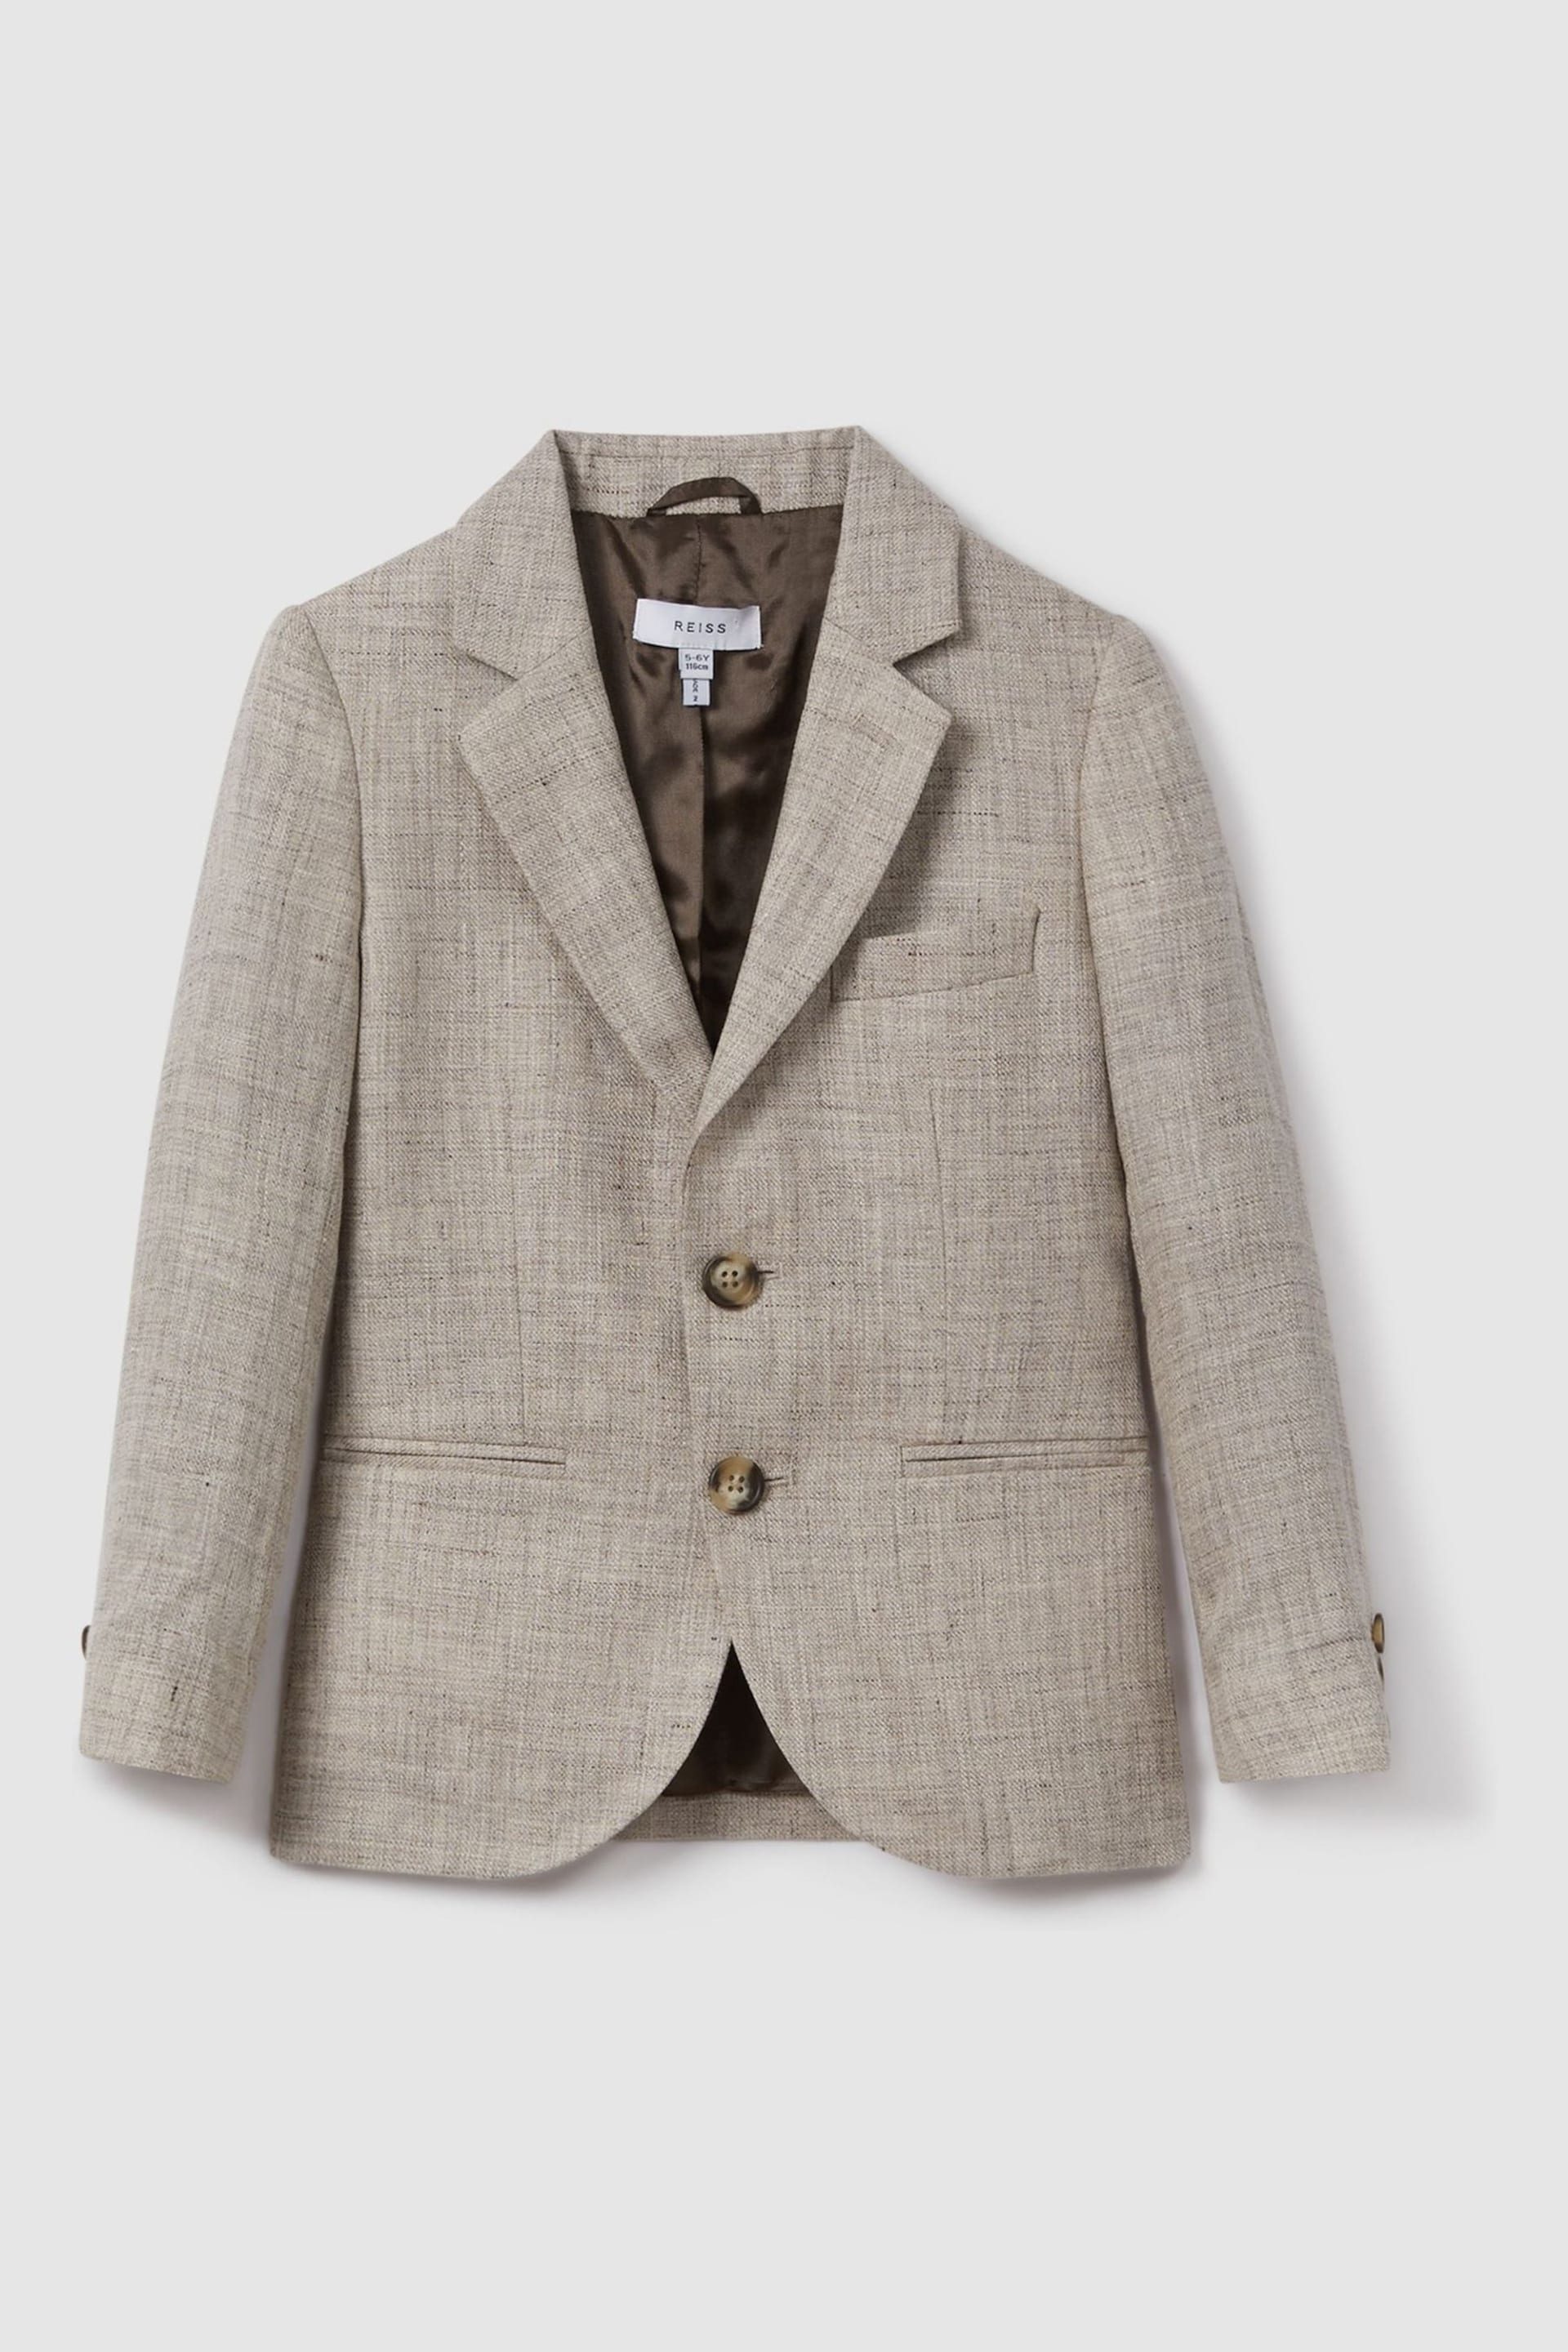 Reiss Oatmeal Auto Junior Single Breasted Textured Linen Blazer - Image 2 of 4